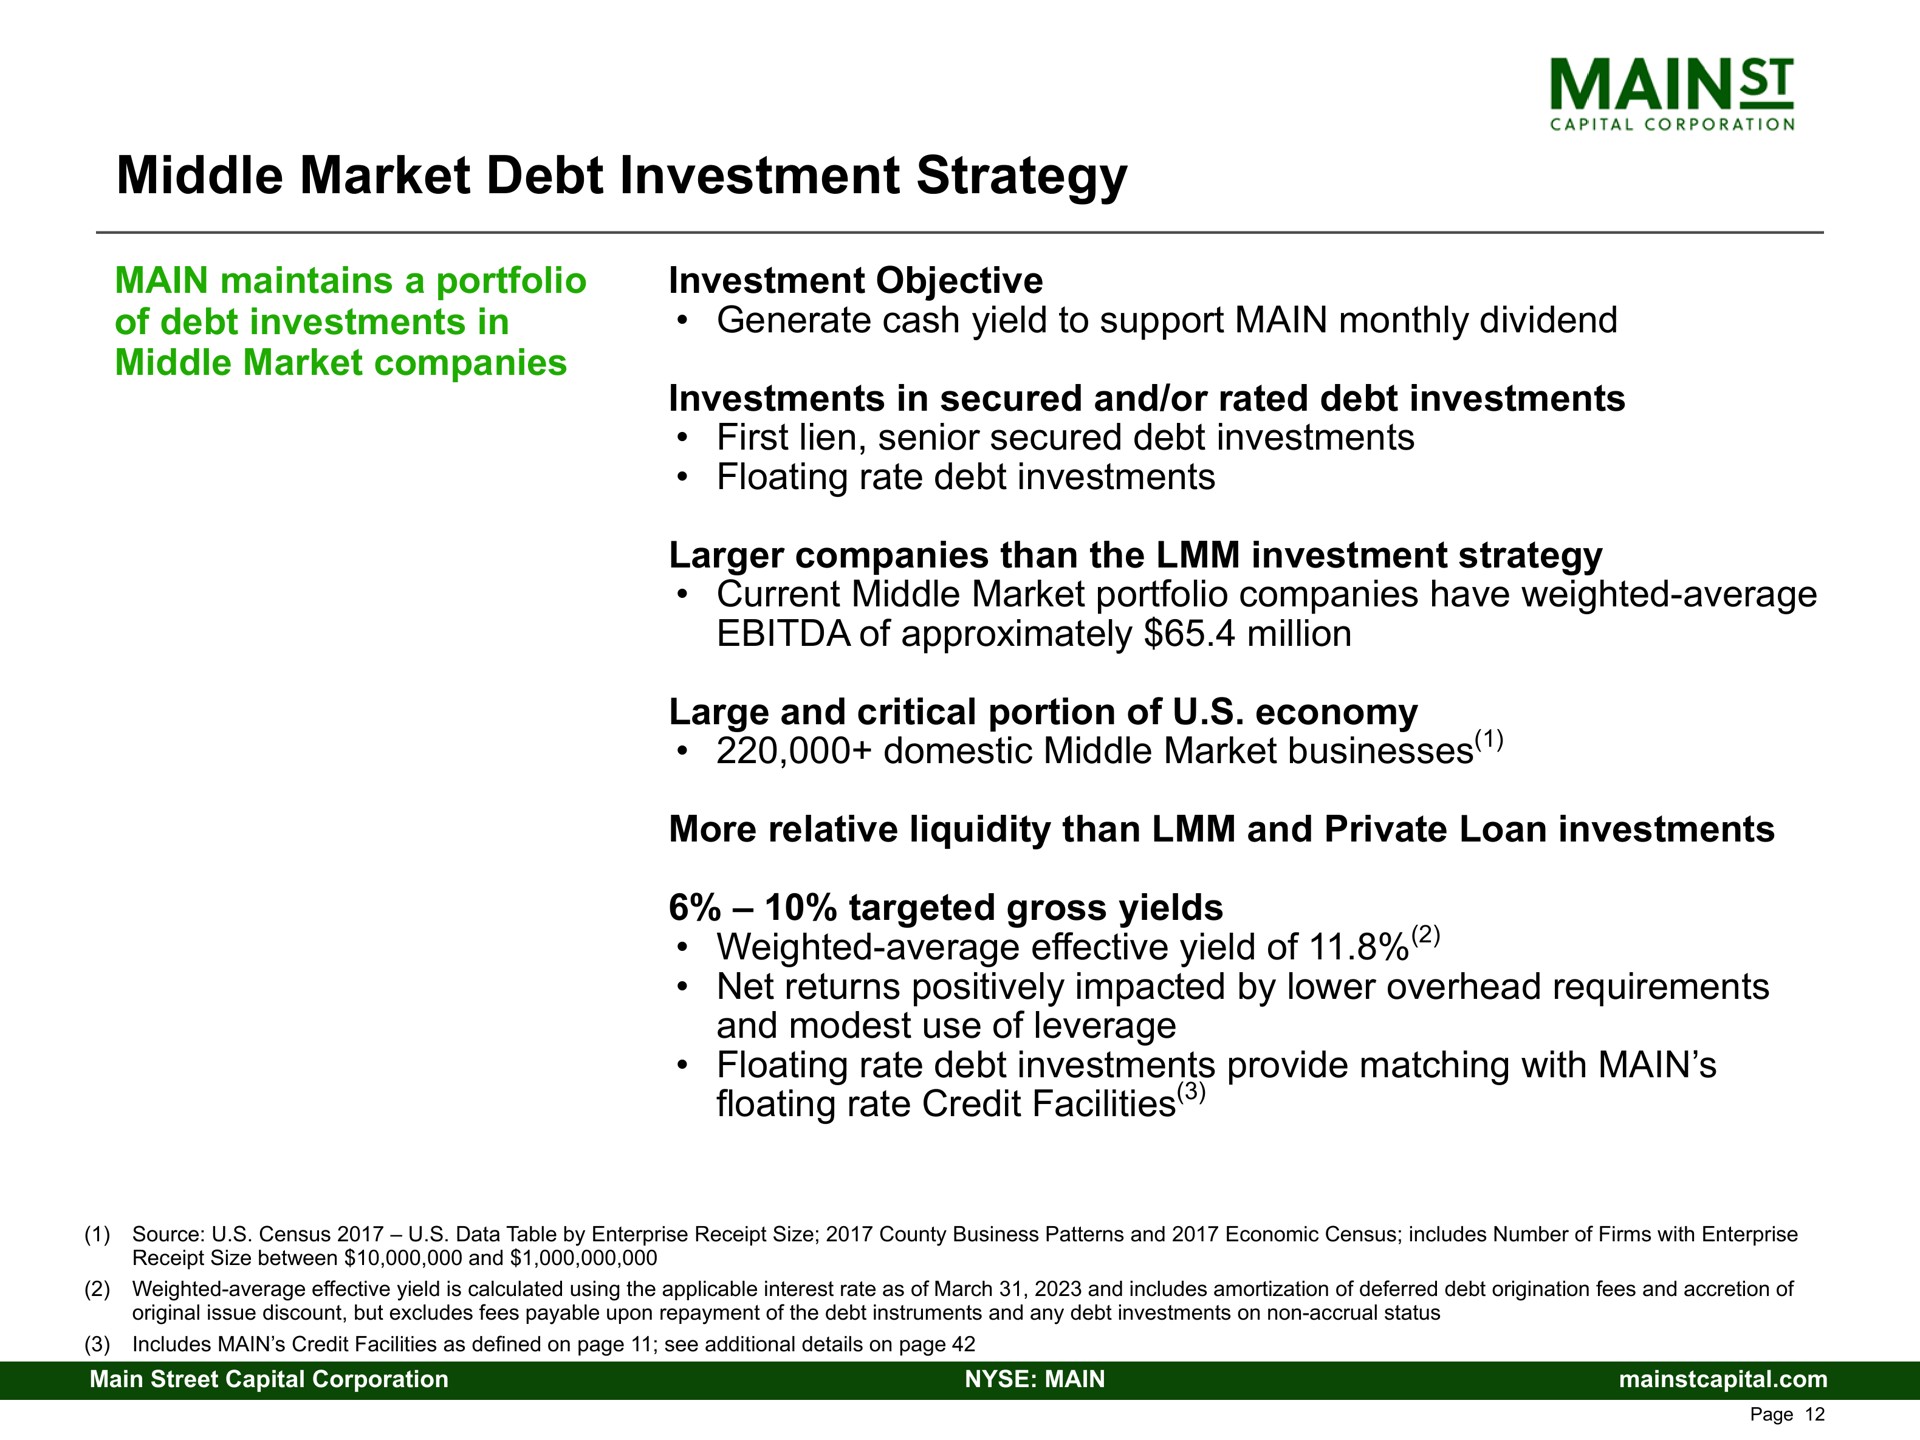 middle market debt investment strategy mains domestic businesses | Main Street Capital